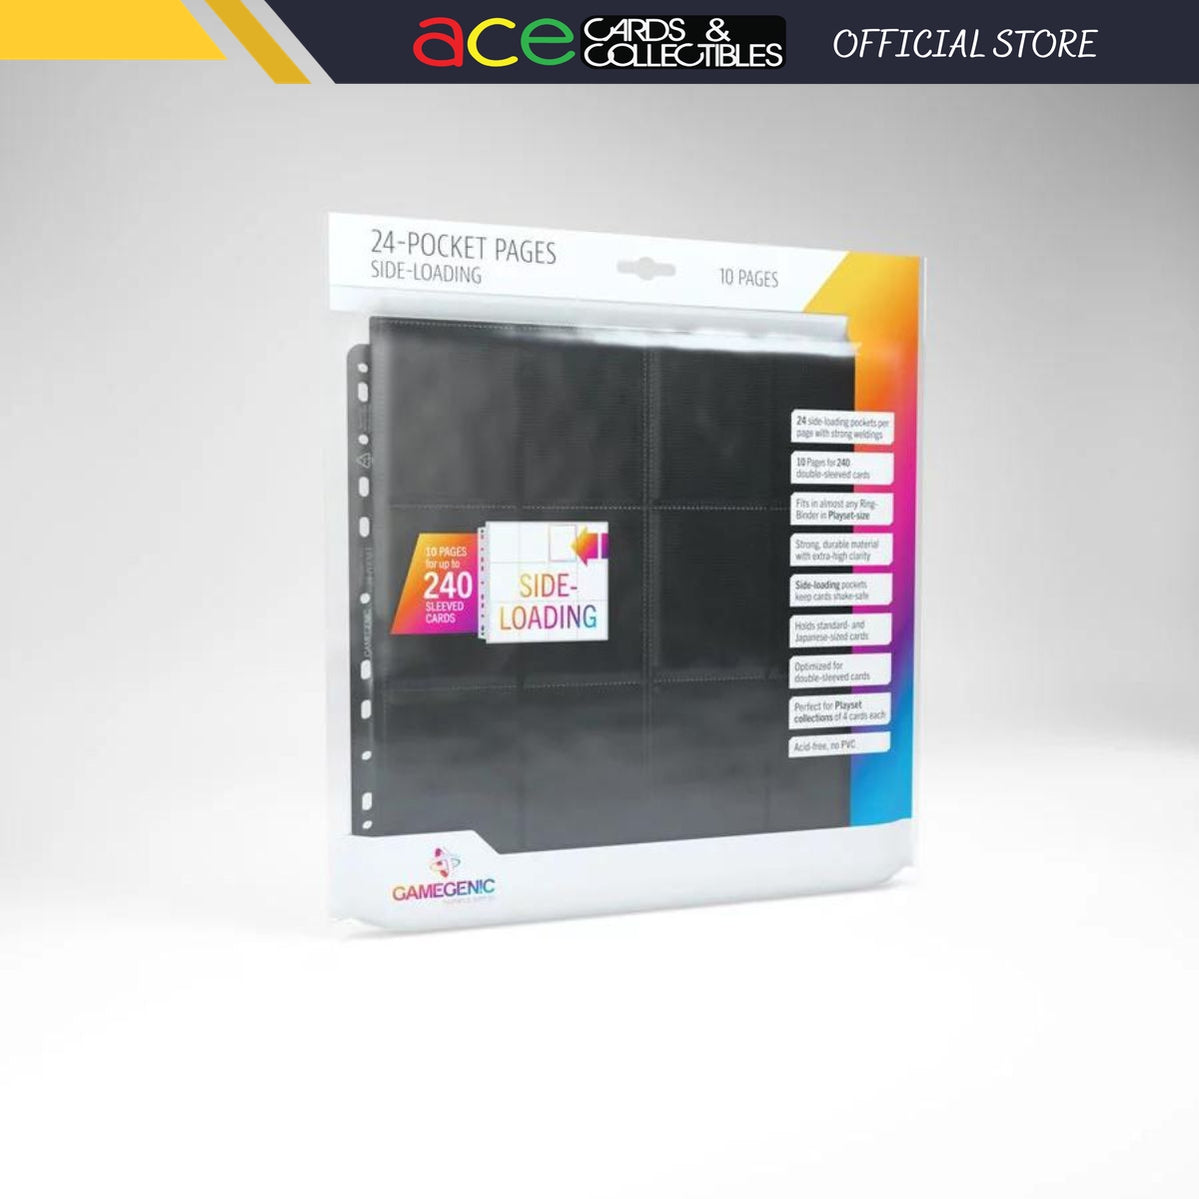 Gamegenic Page &quot;24-Pocket Pages Side-loading (10 pages bag)&quot;-Gamegenic-Ace Cards &amp; Collectibles